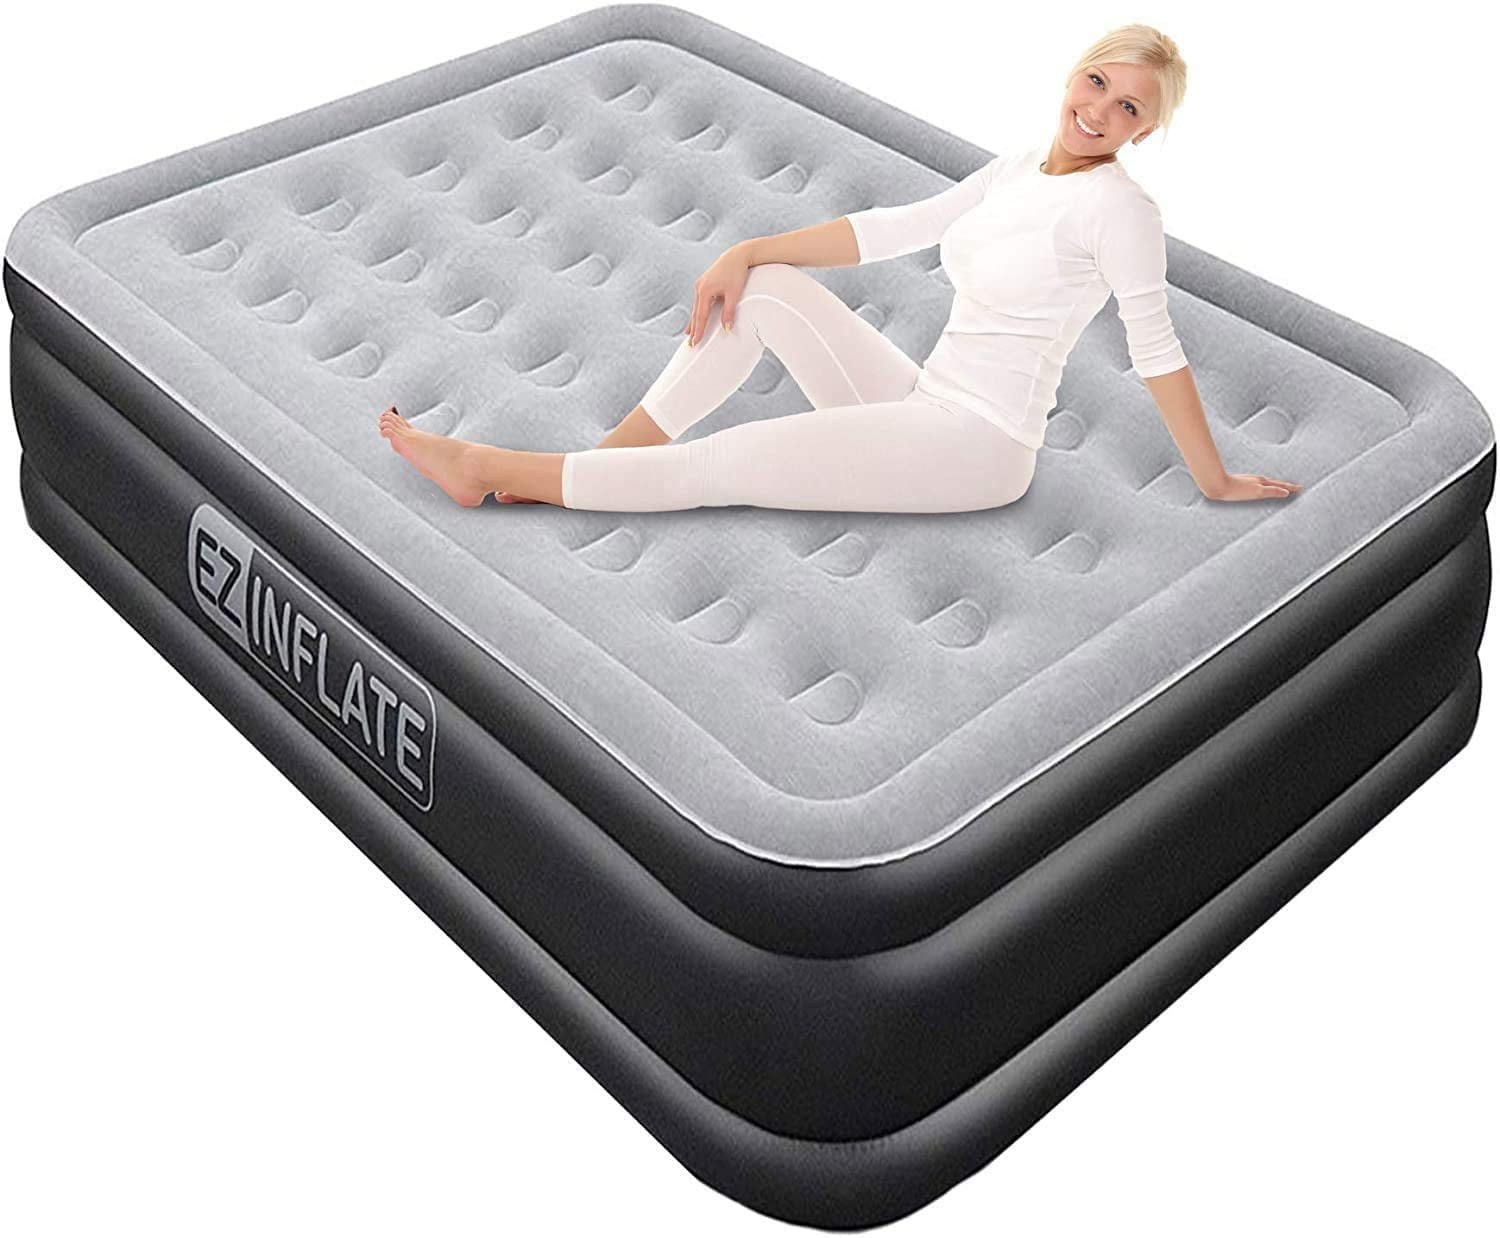 Deluxe Inflatable Air Bed Mattresses Built-in Pillow & Electric Pump Queen Bed 